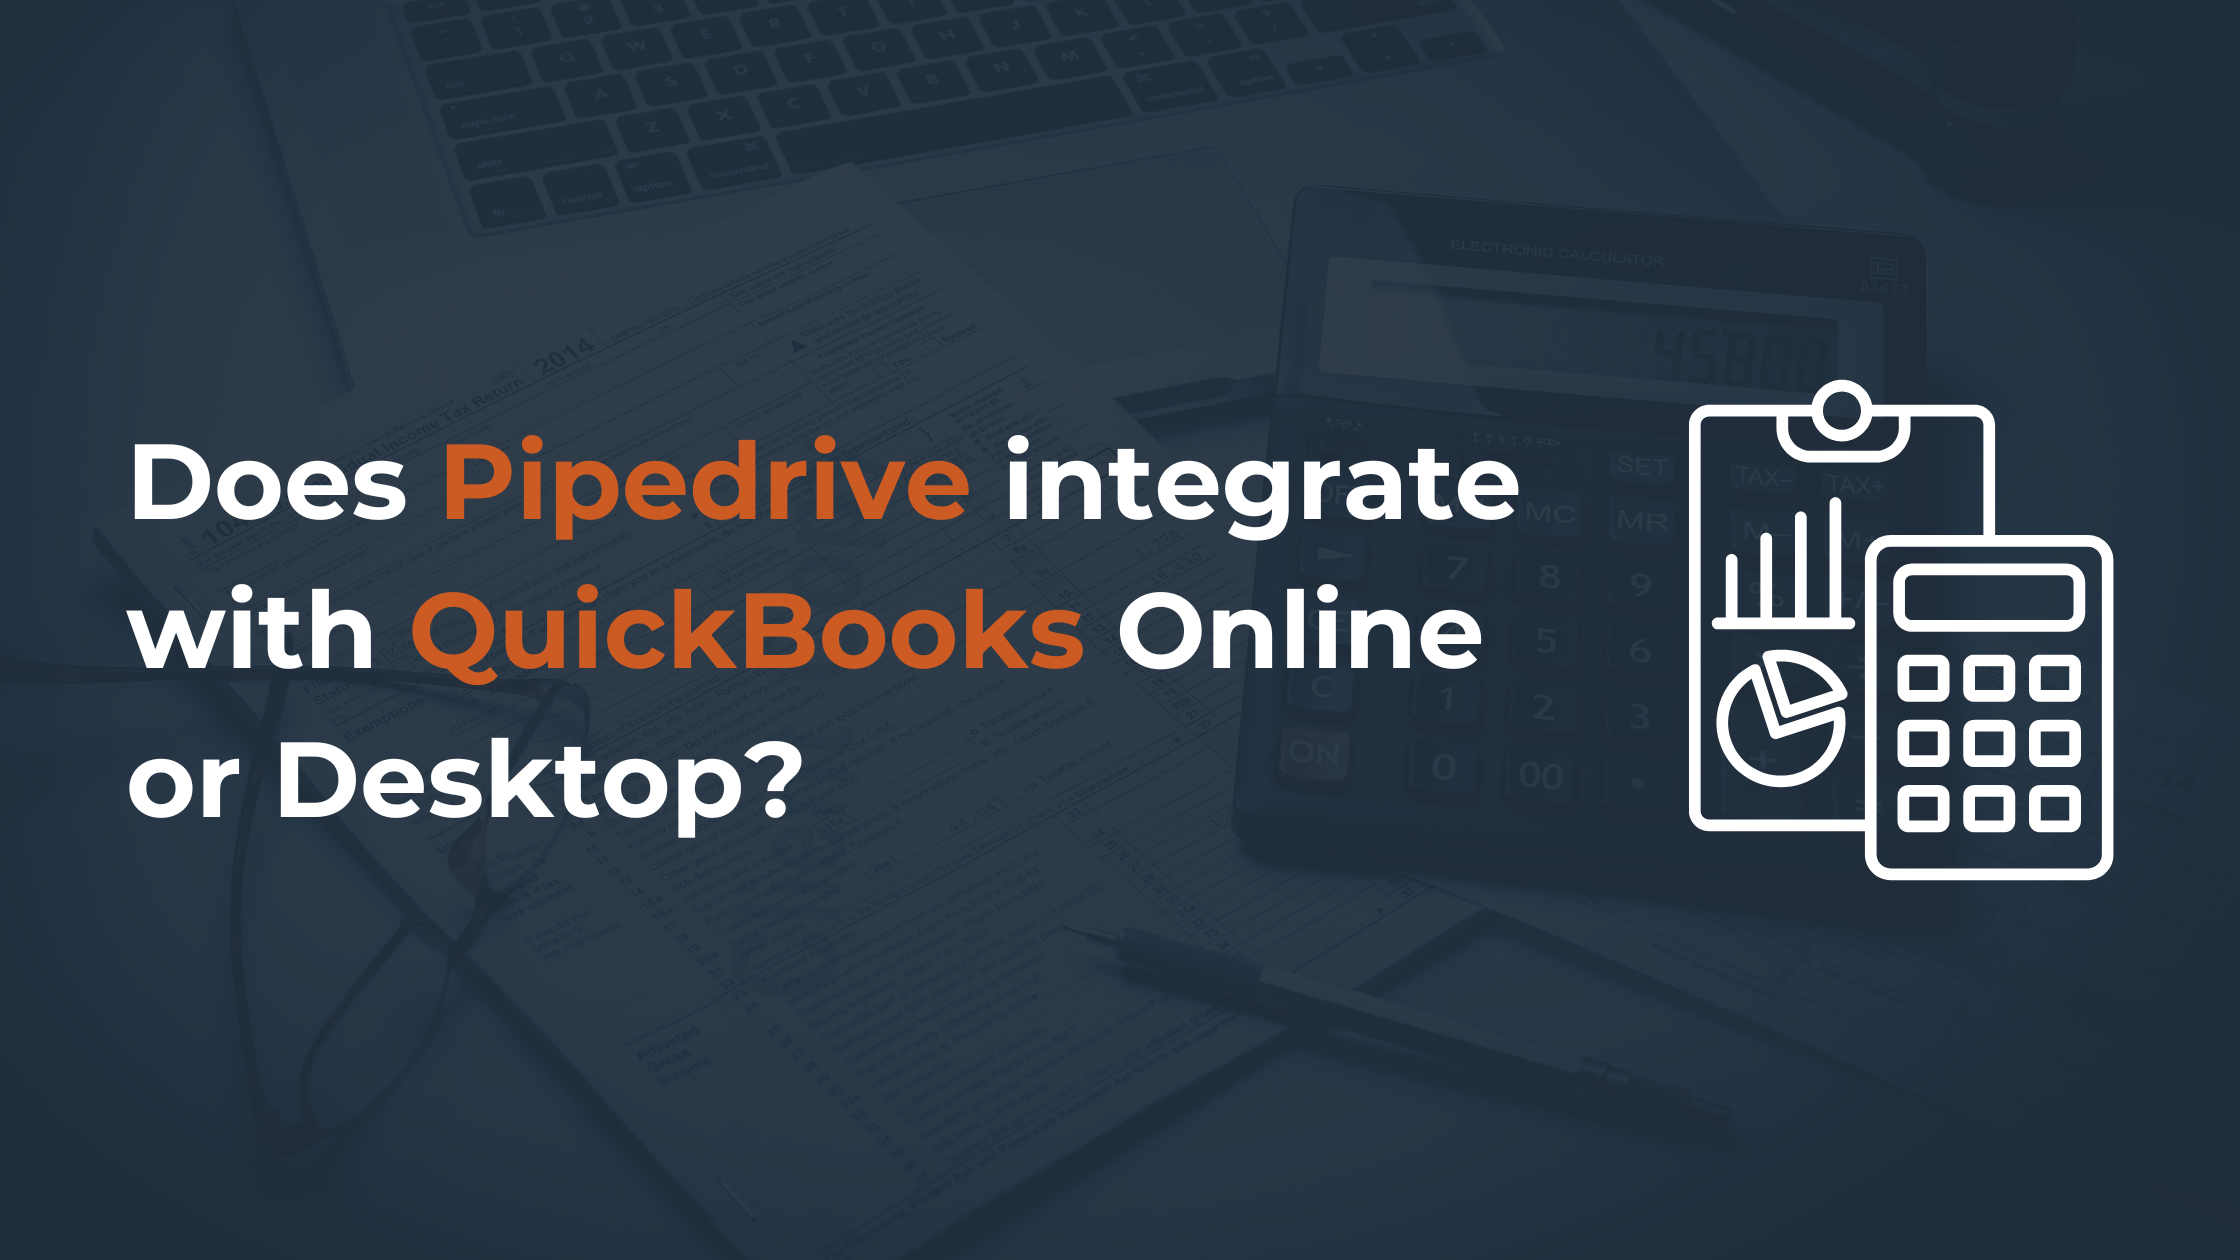 Does Pipedrive integrate with QuickBooks?